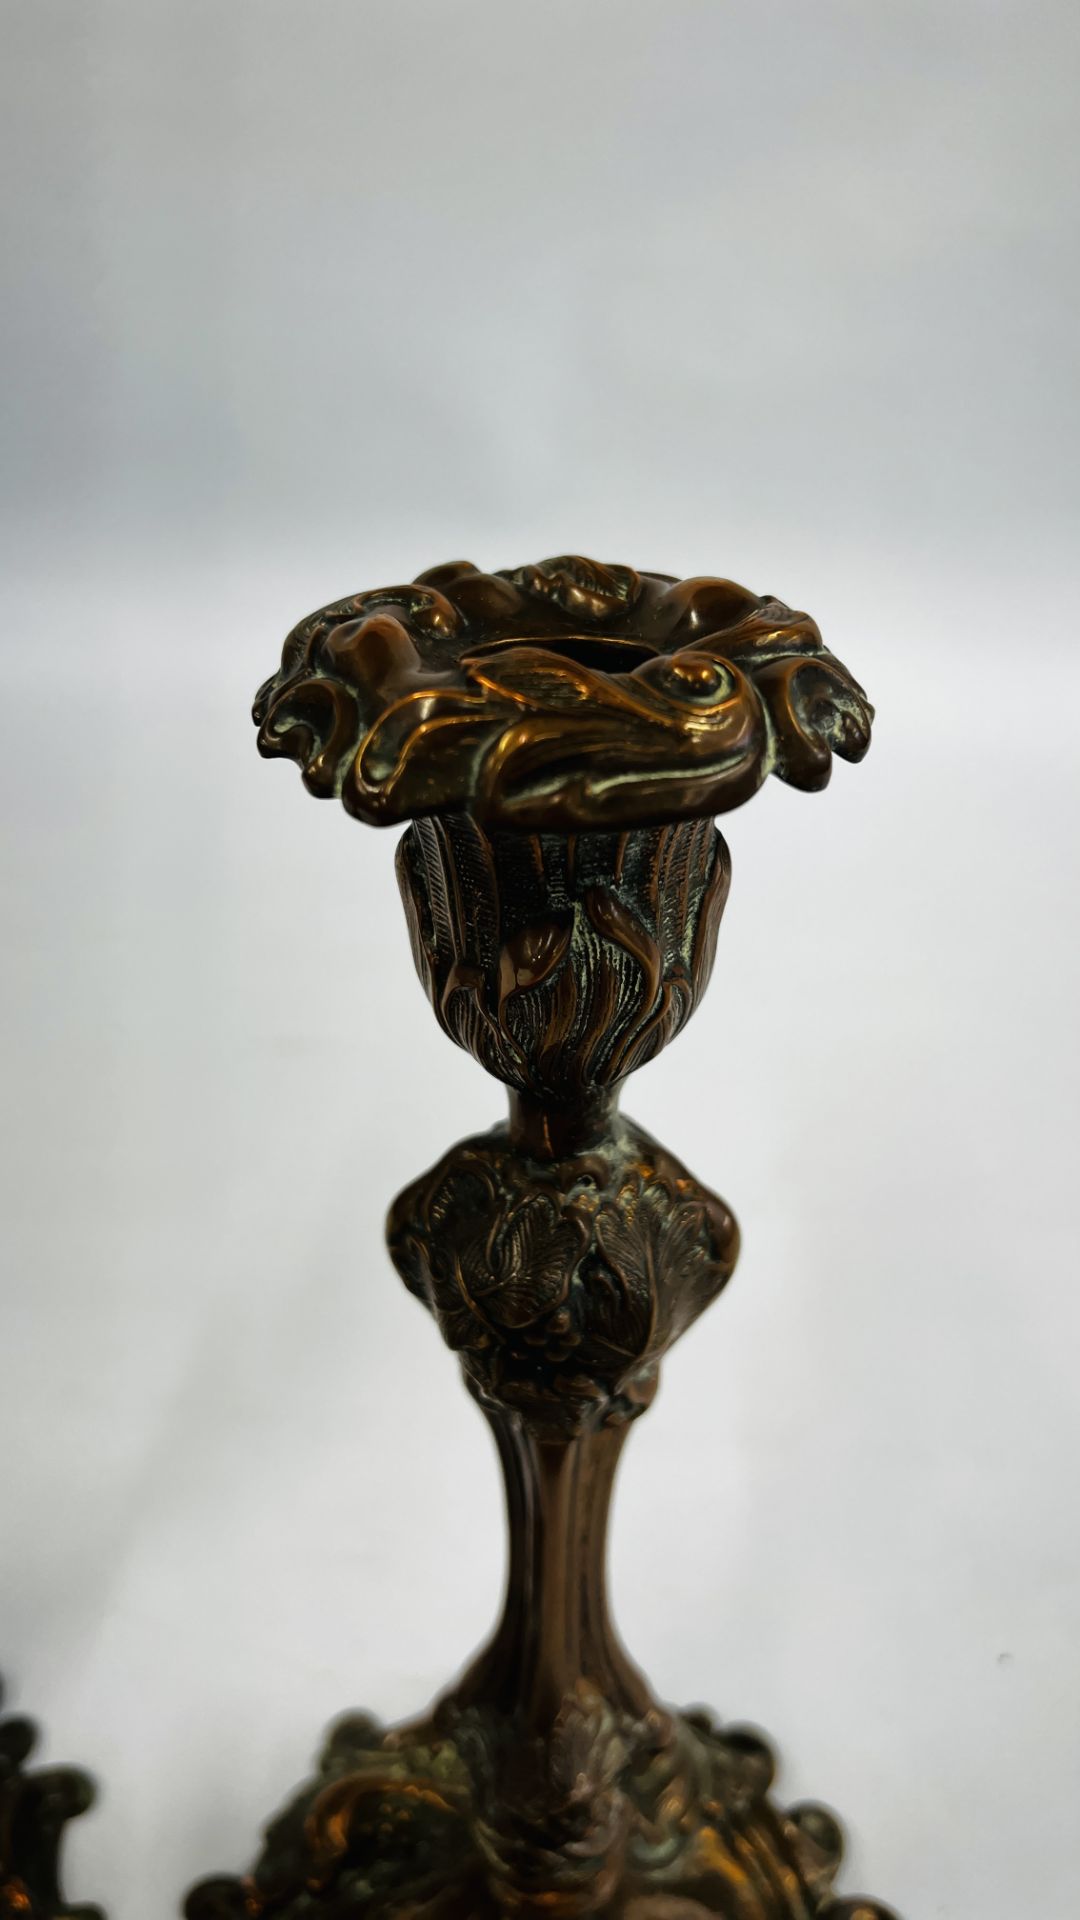 A PAIR OF ORNATE C19TH COPPER CANDLESTICKS WITH DETACHABLE SCONCES - HEIGHT 27CM. - Image 14 of 20